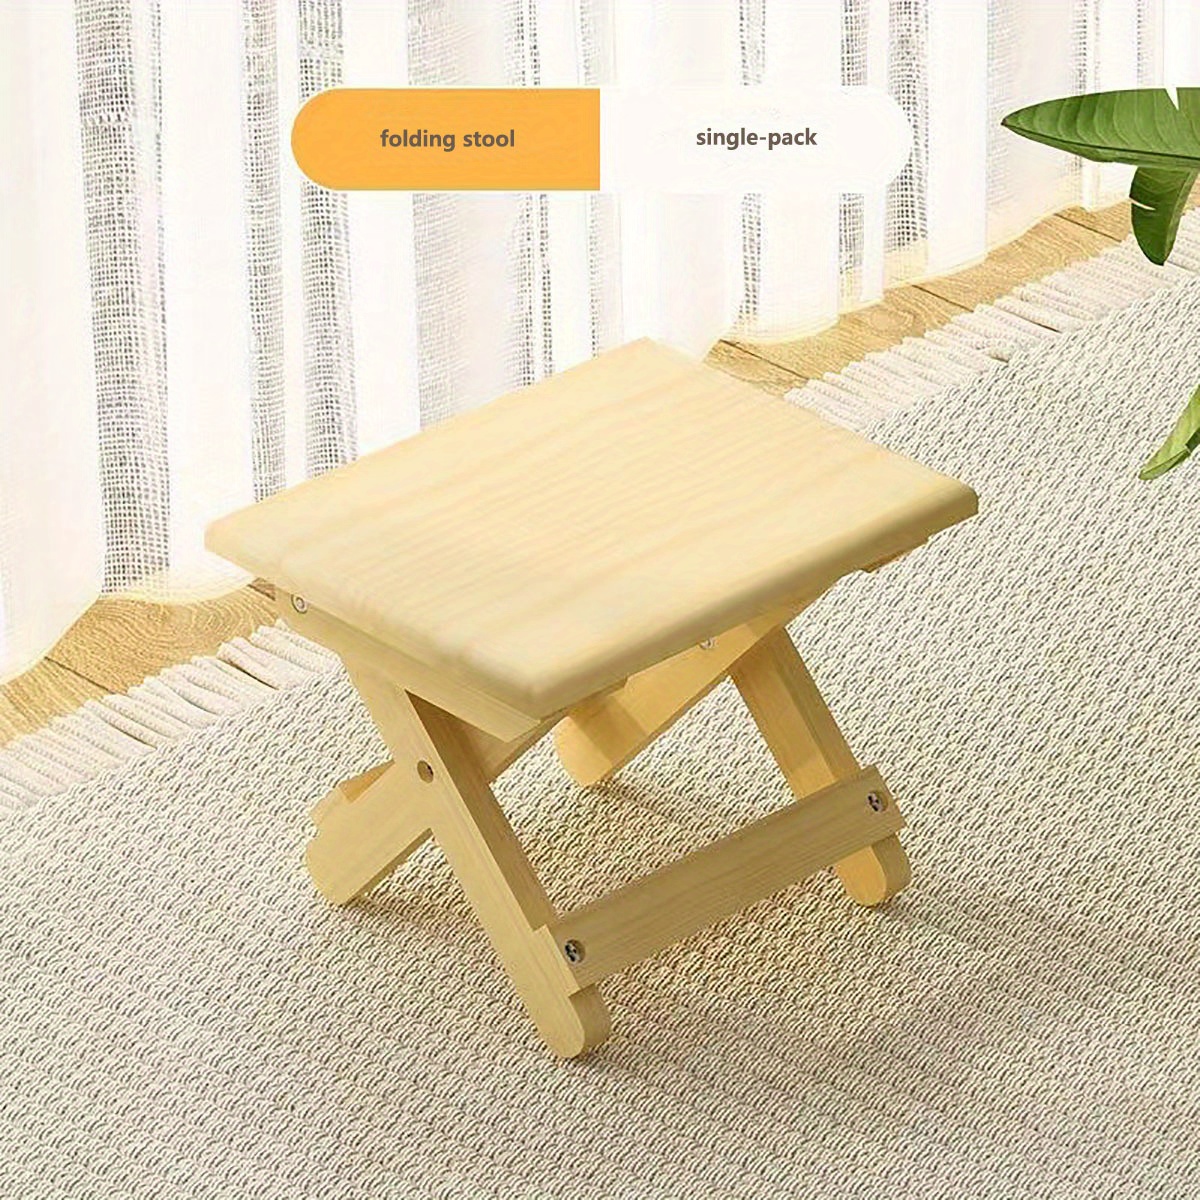 Lightweight Foldable Wooden Stool,Portable Collapsible Wood Seat, Heavy  Duty Fishing Chair,Waterproof, Resting,Leg Shaving,Fishing,Camping